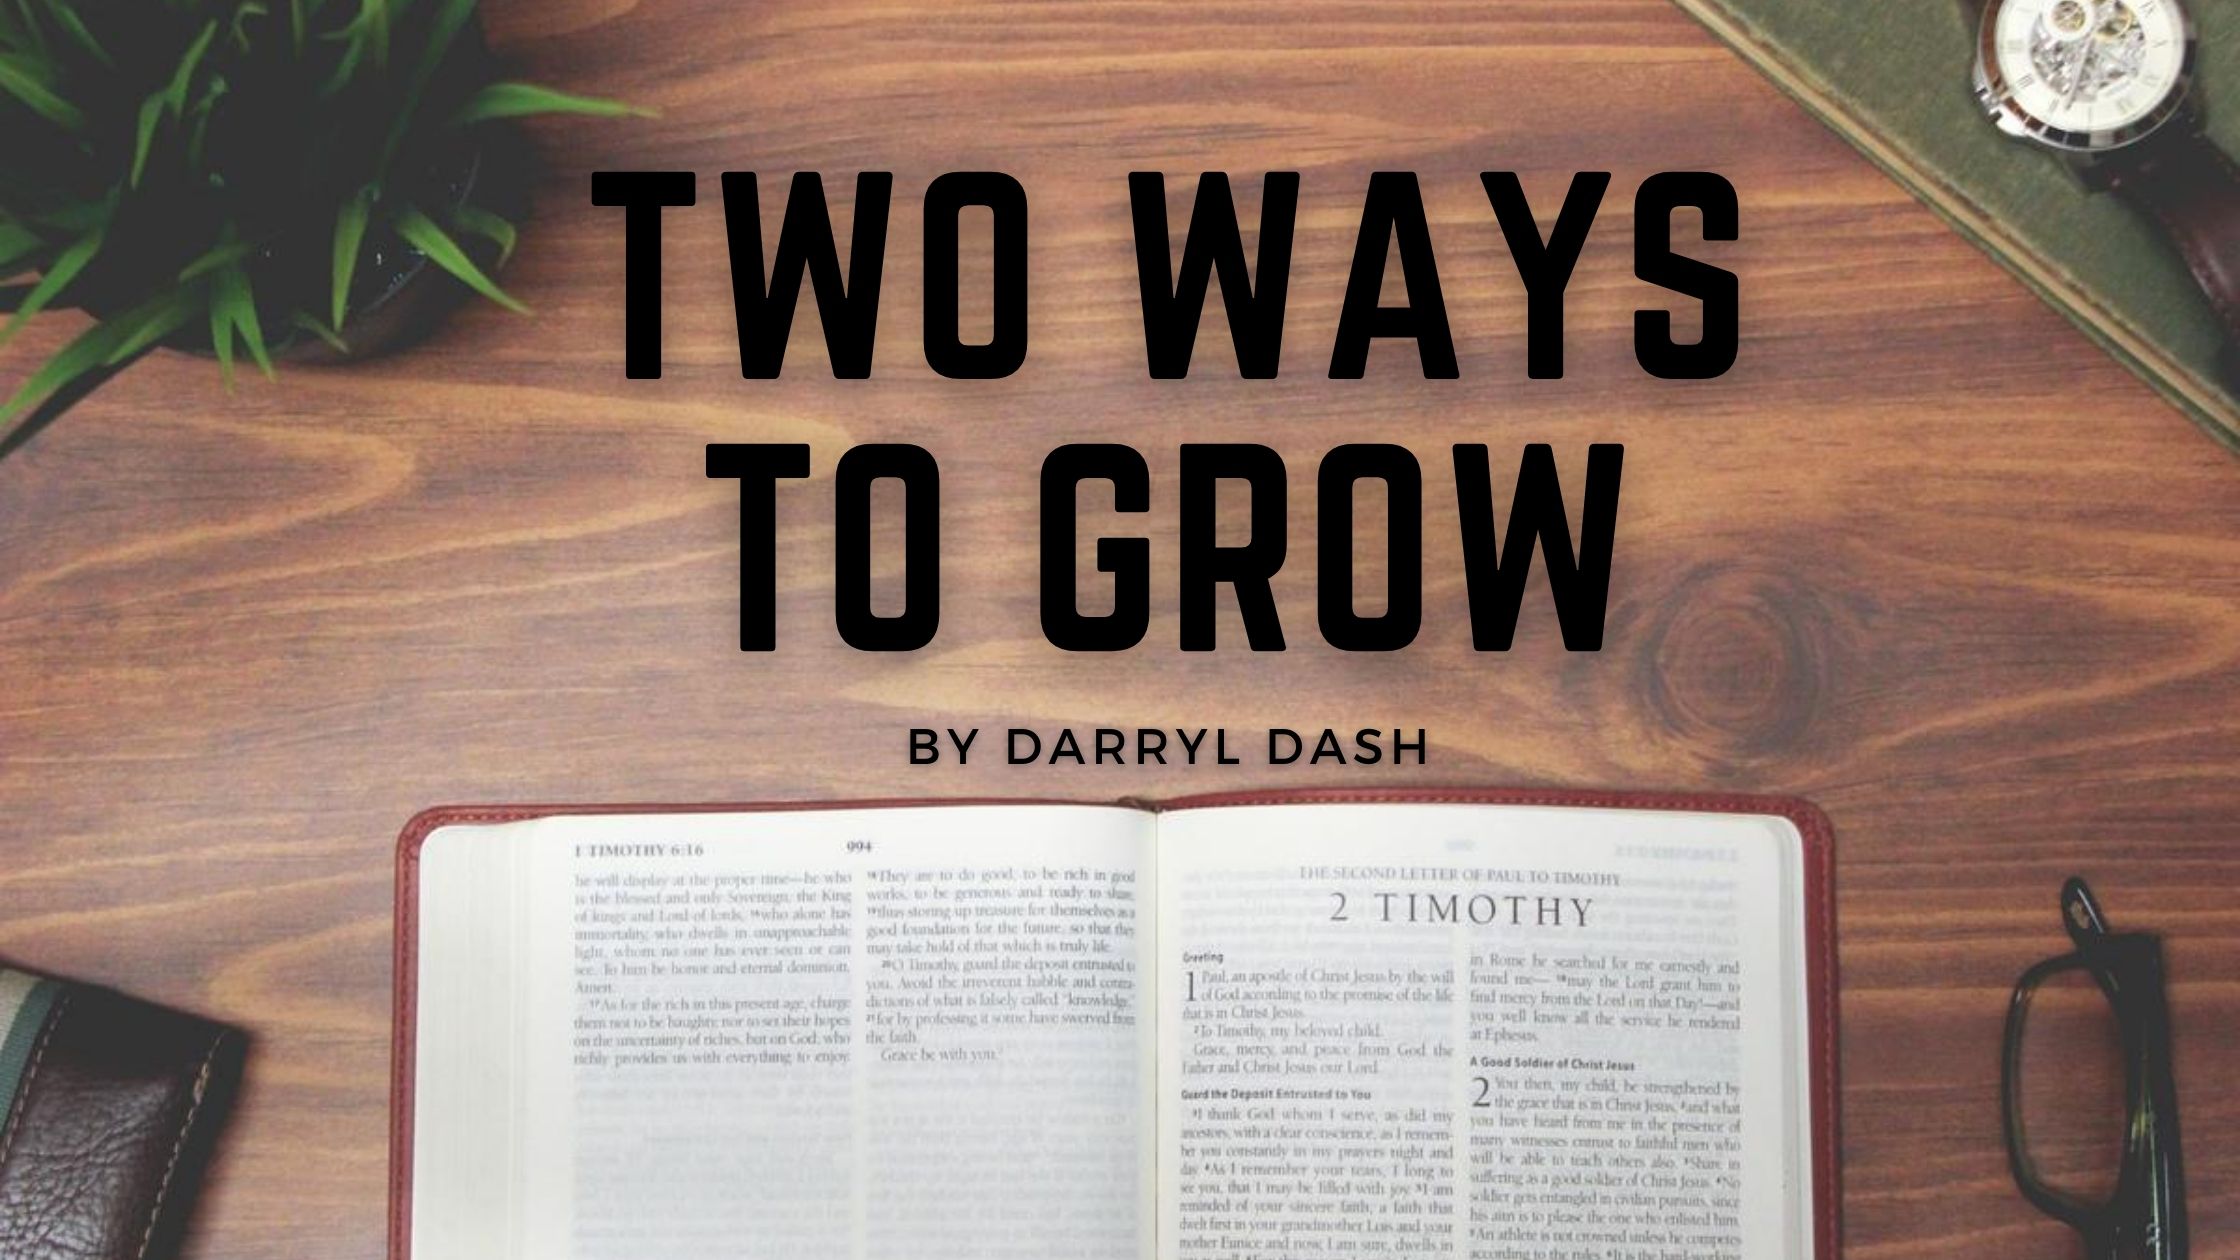 Two Ways to Grow (2 Timothy 3:14-17)